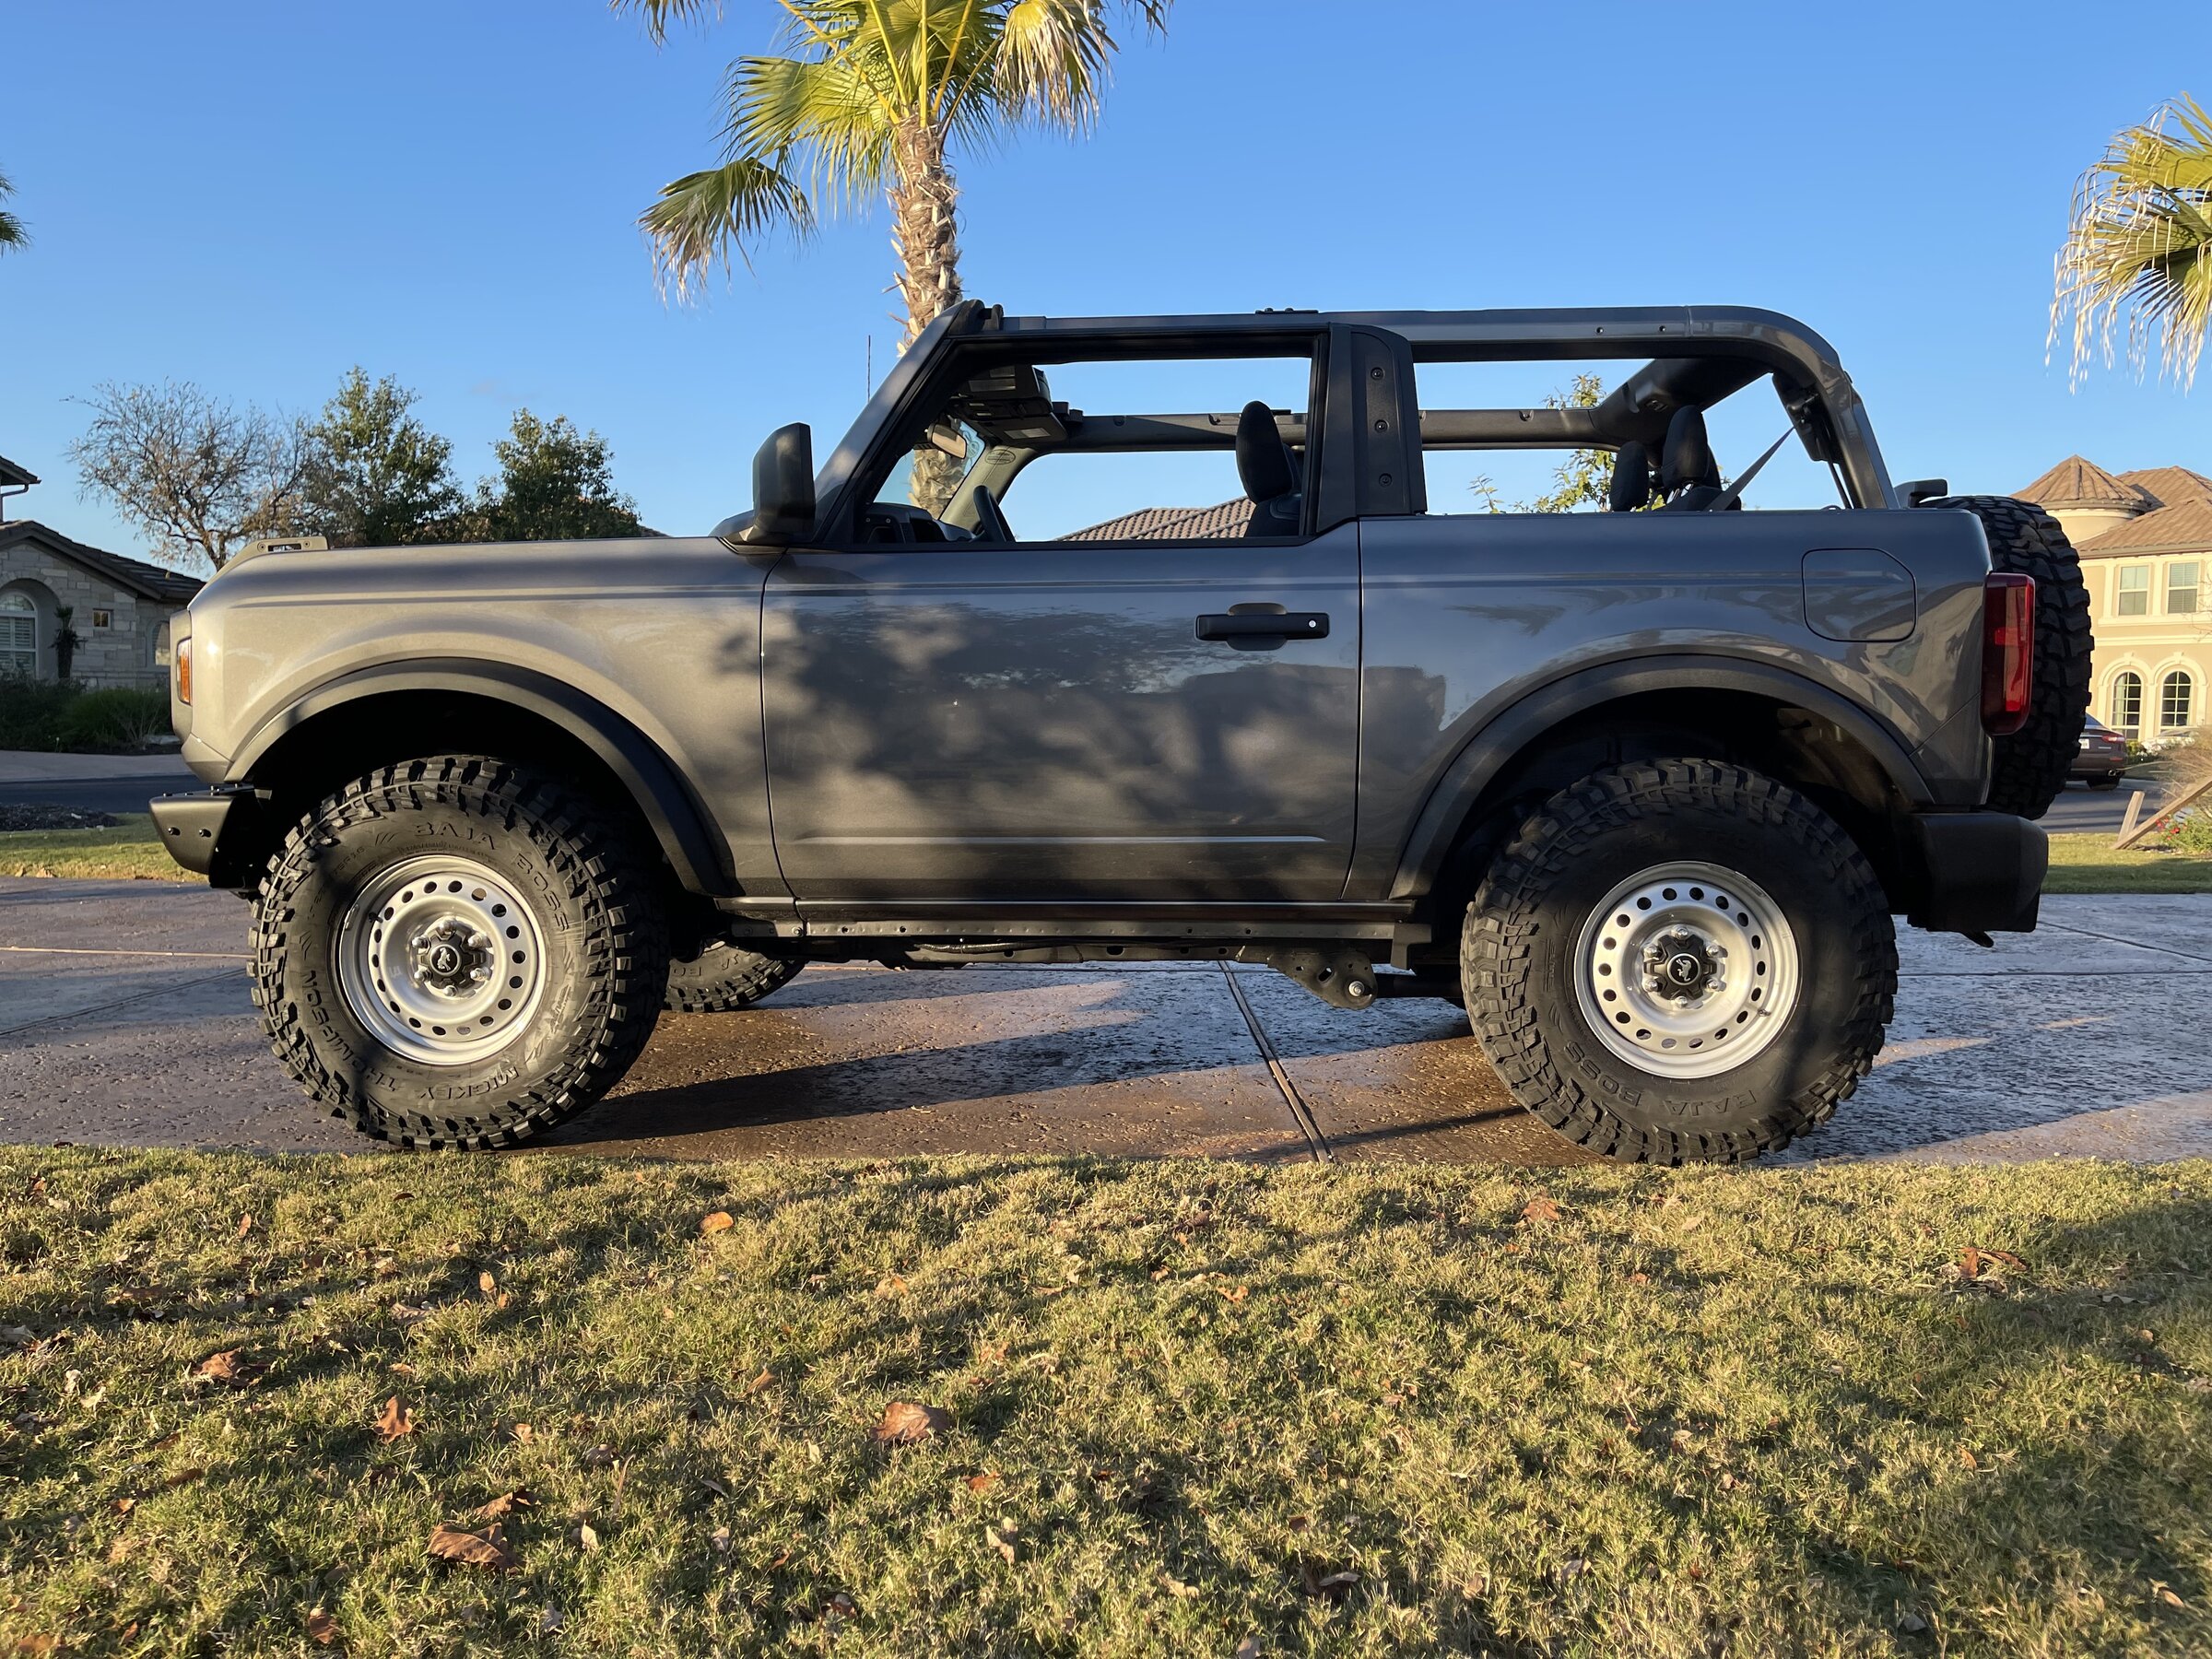 Ford Bronco Show us your installed wheel / tire upgrades here! (Pics) 81083A47-EFF2-4C02-9E16-CA7D8BDCF5DD